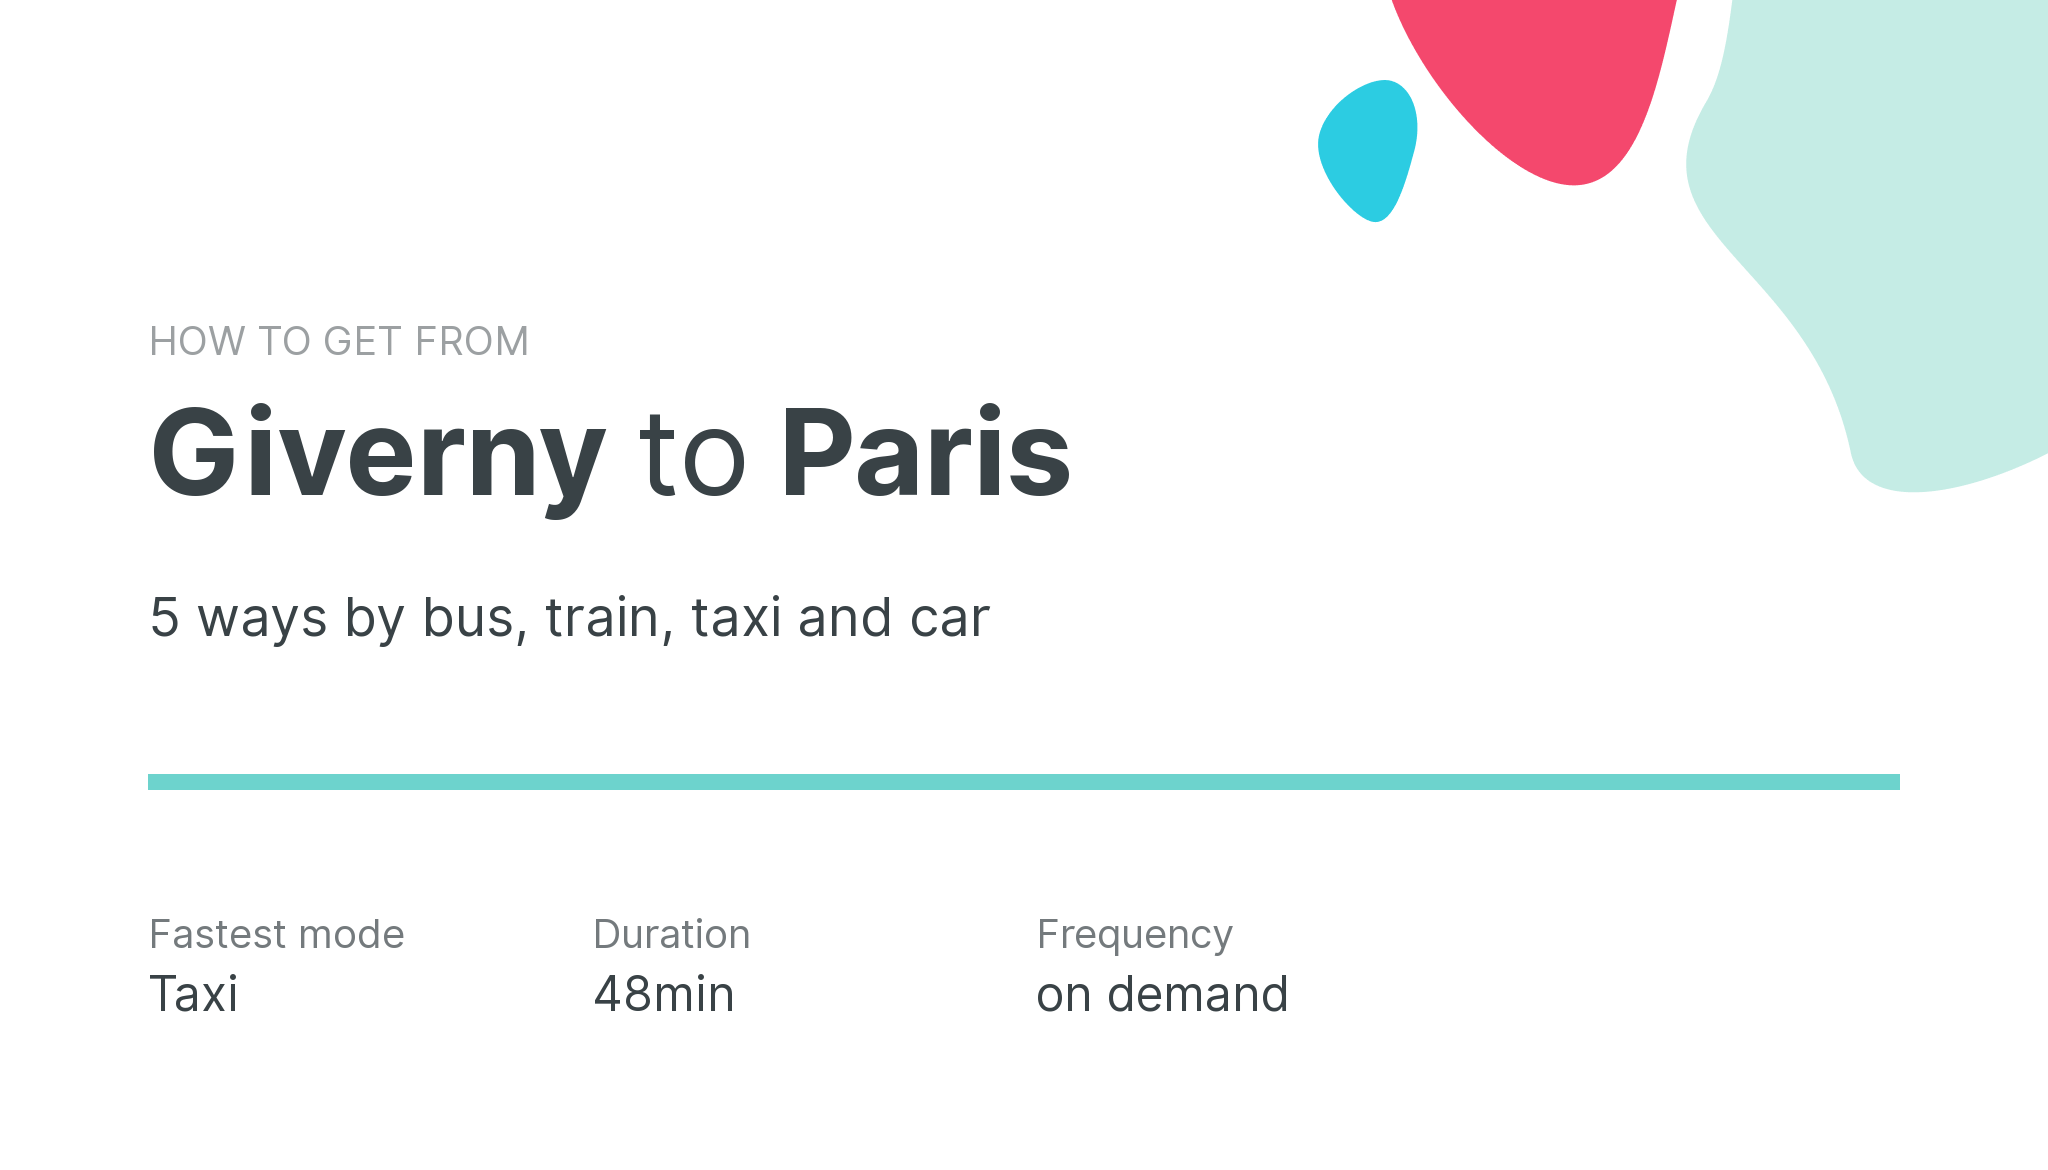 How do I get from Giverny to Paris